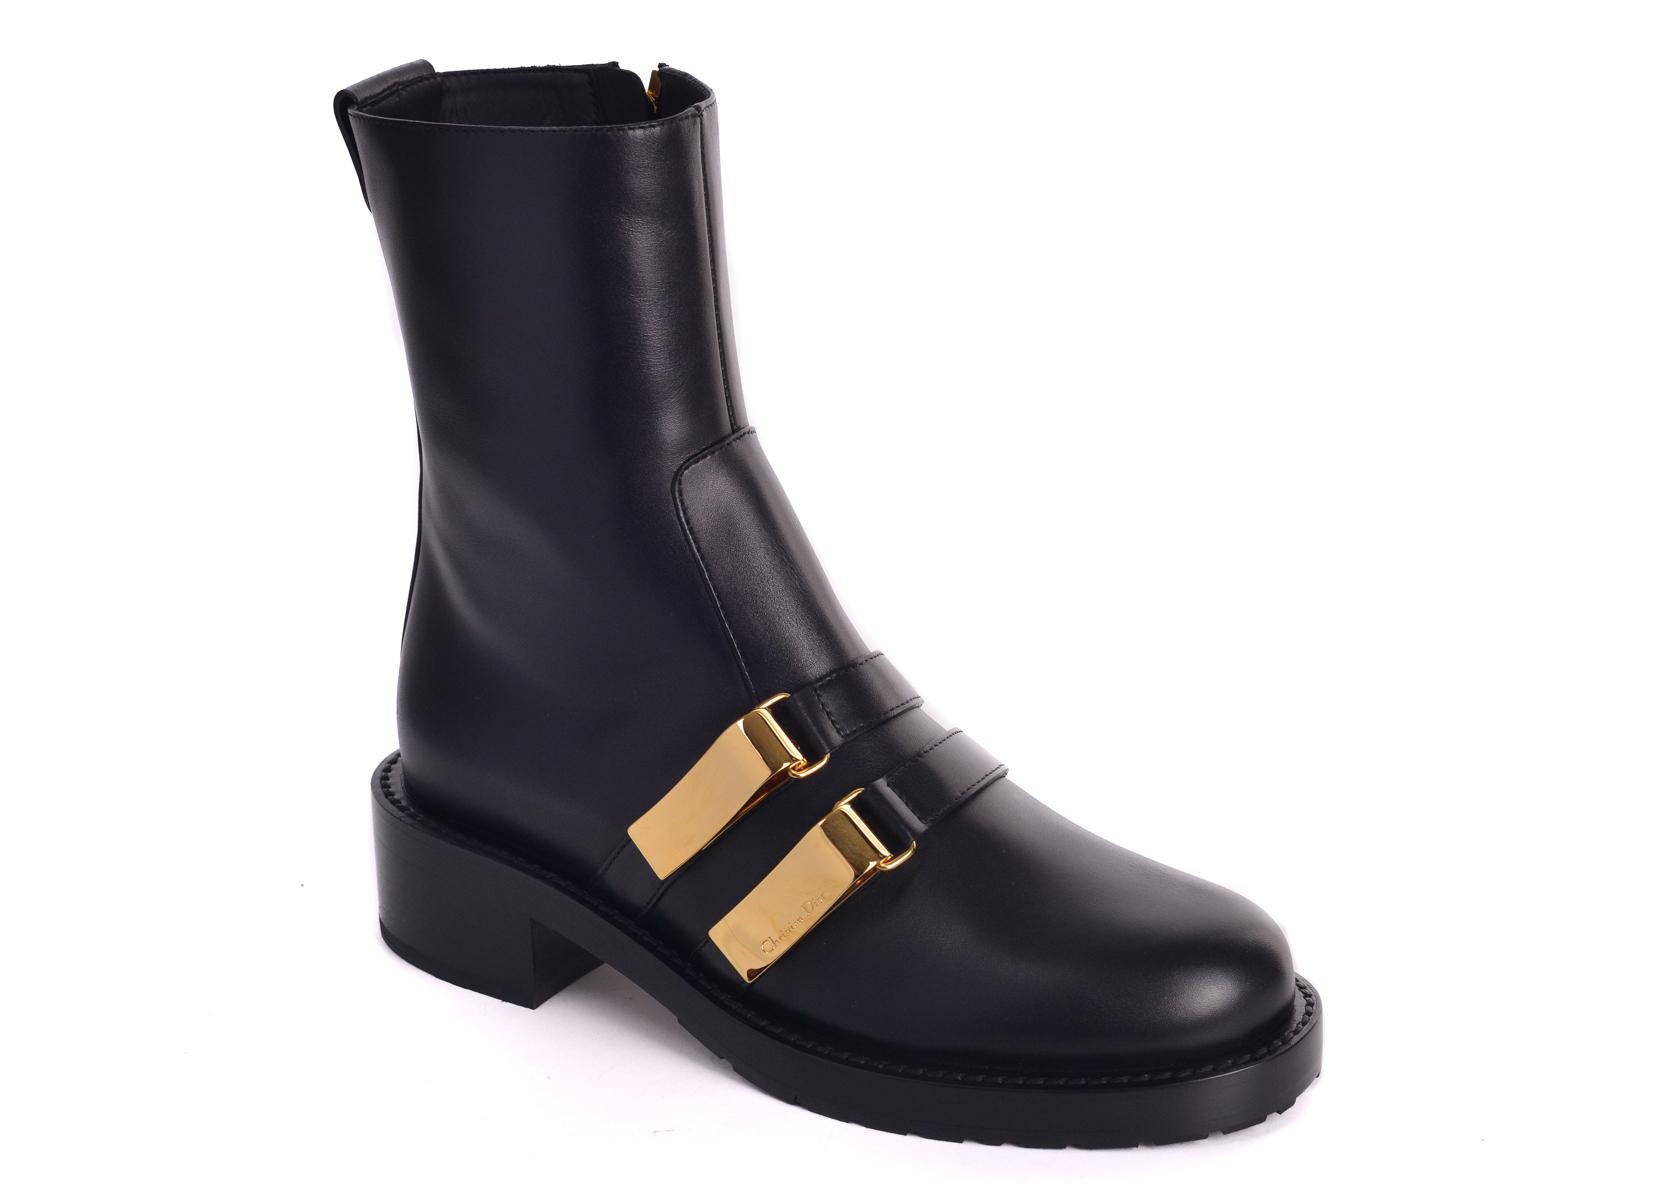 Christian Dior black leather D-Race ankle boots. These boots are the perfect execution of comfort and style with its chic sleek look. Perfect pair of boots for all around the season, pair with your leather jacket for an edgy feminine